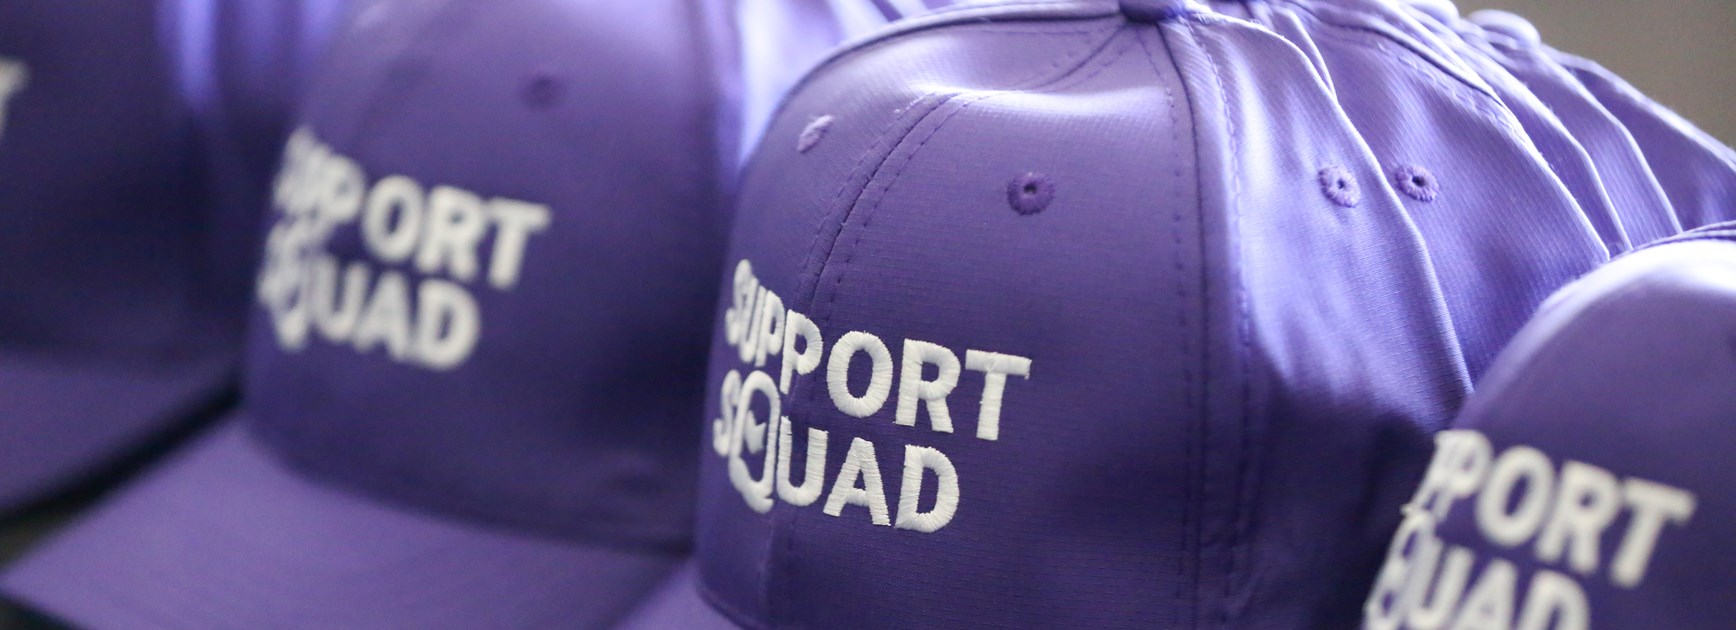 Wellbeing Wednesday: Support Squad volunteers needed